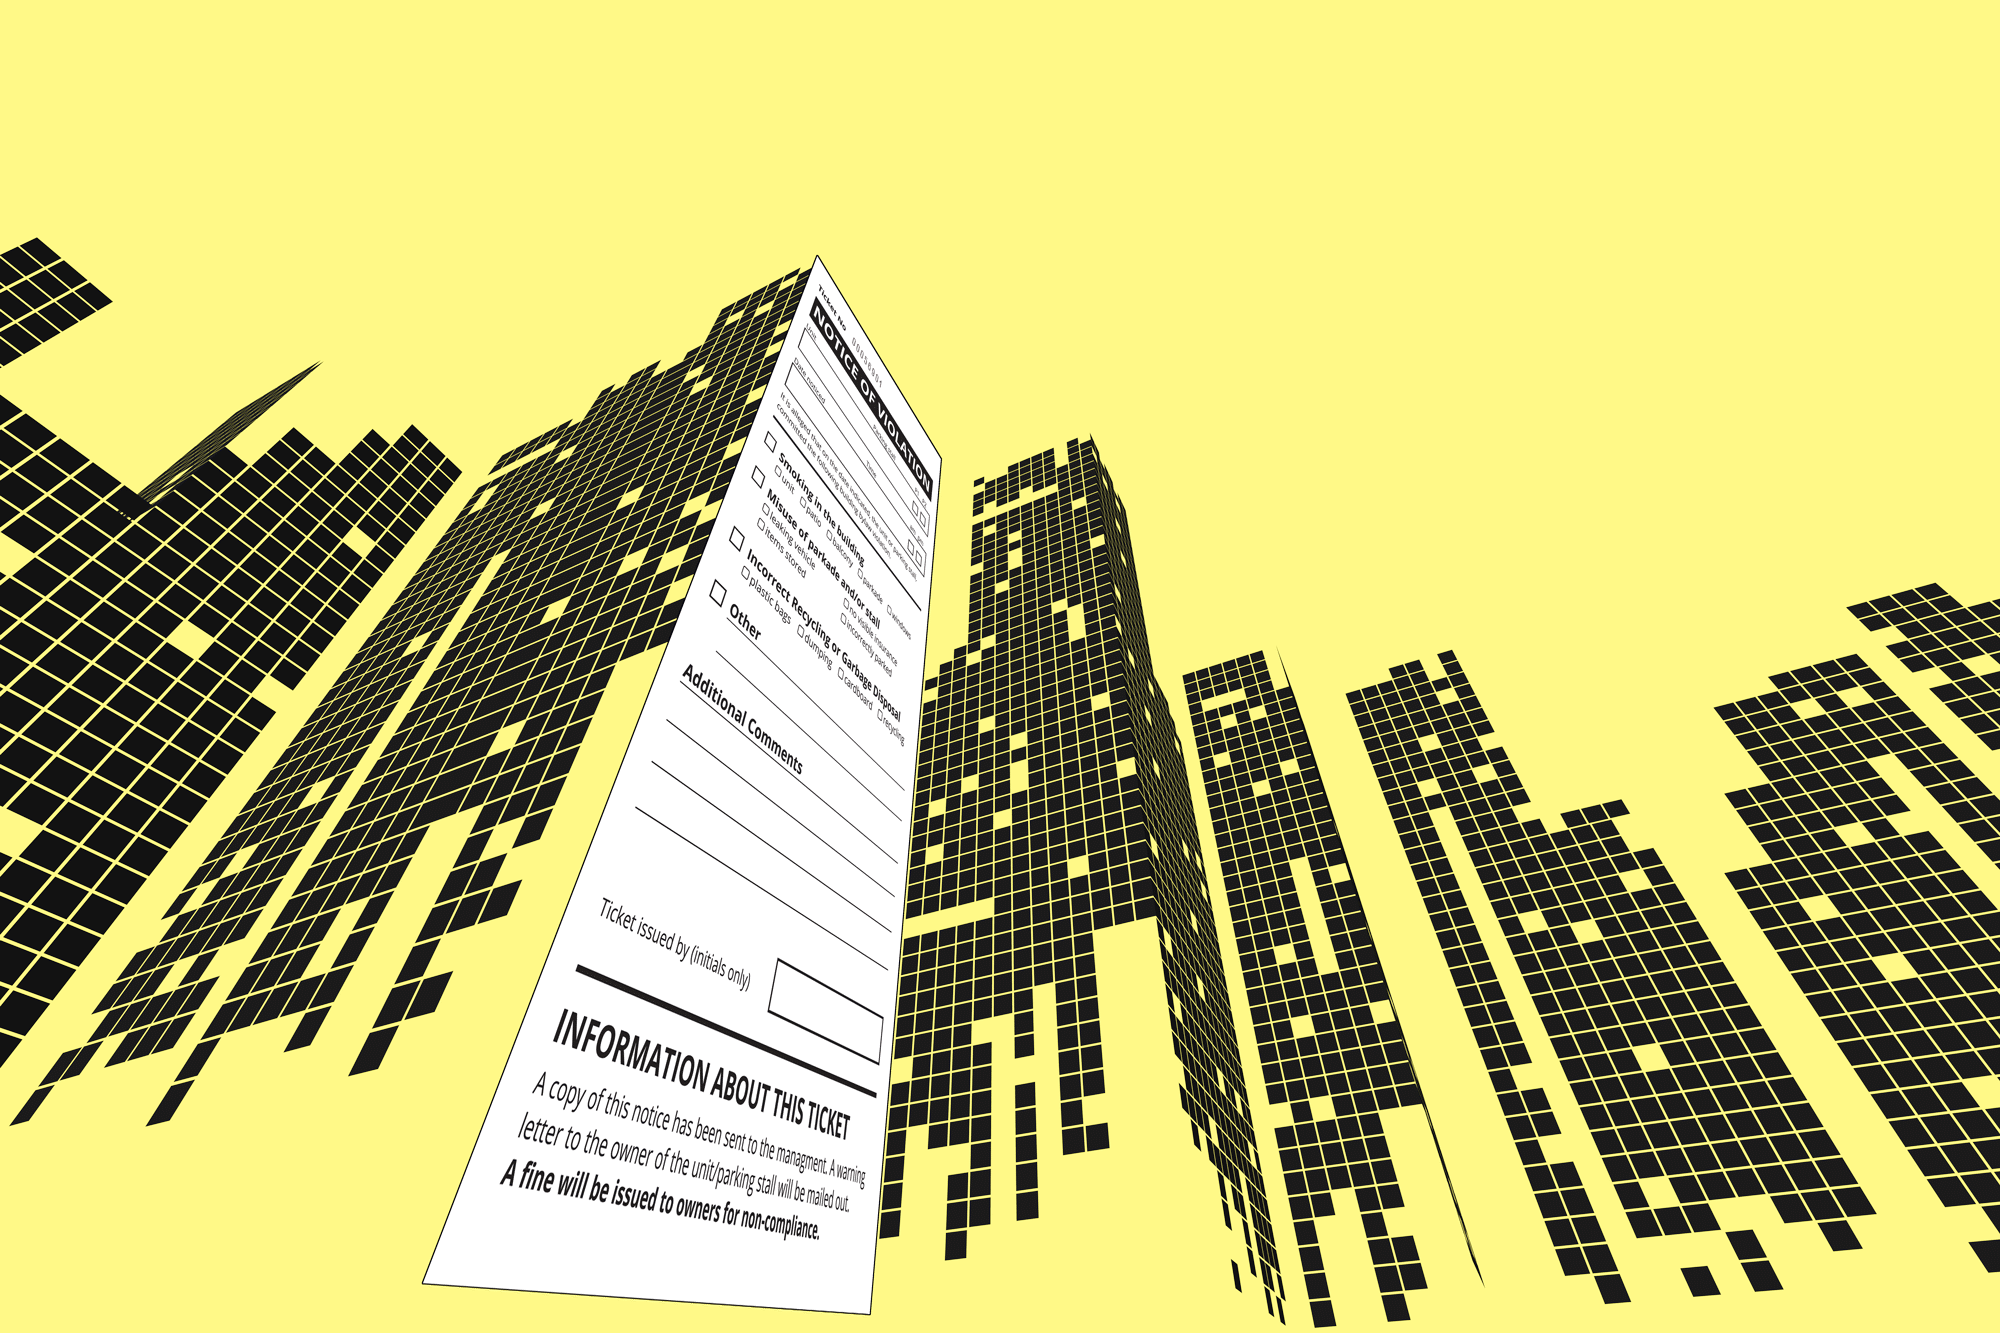 An image of a cityscape with a vibrant yellow background highlighting parking and mobility.